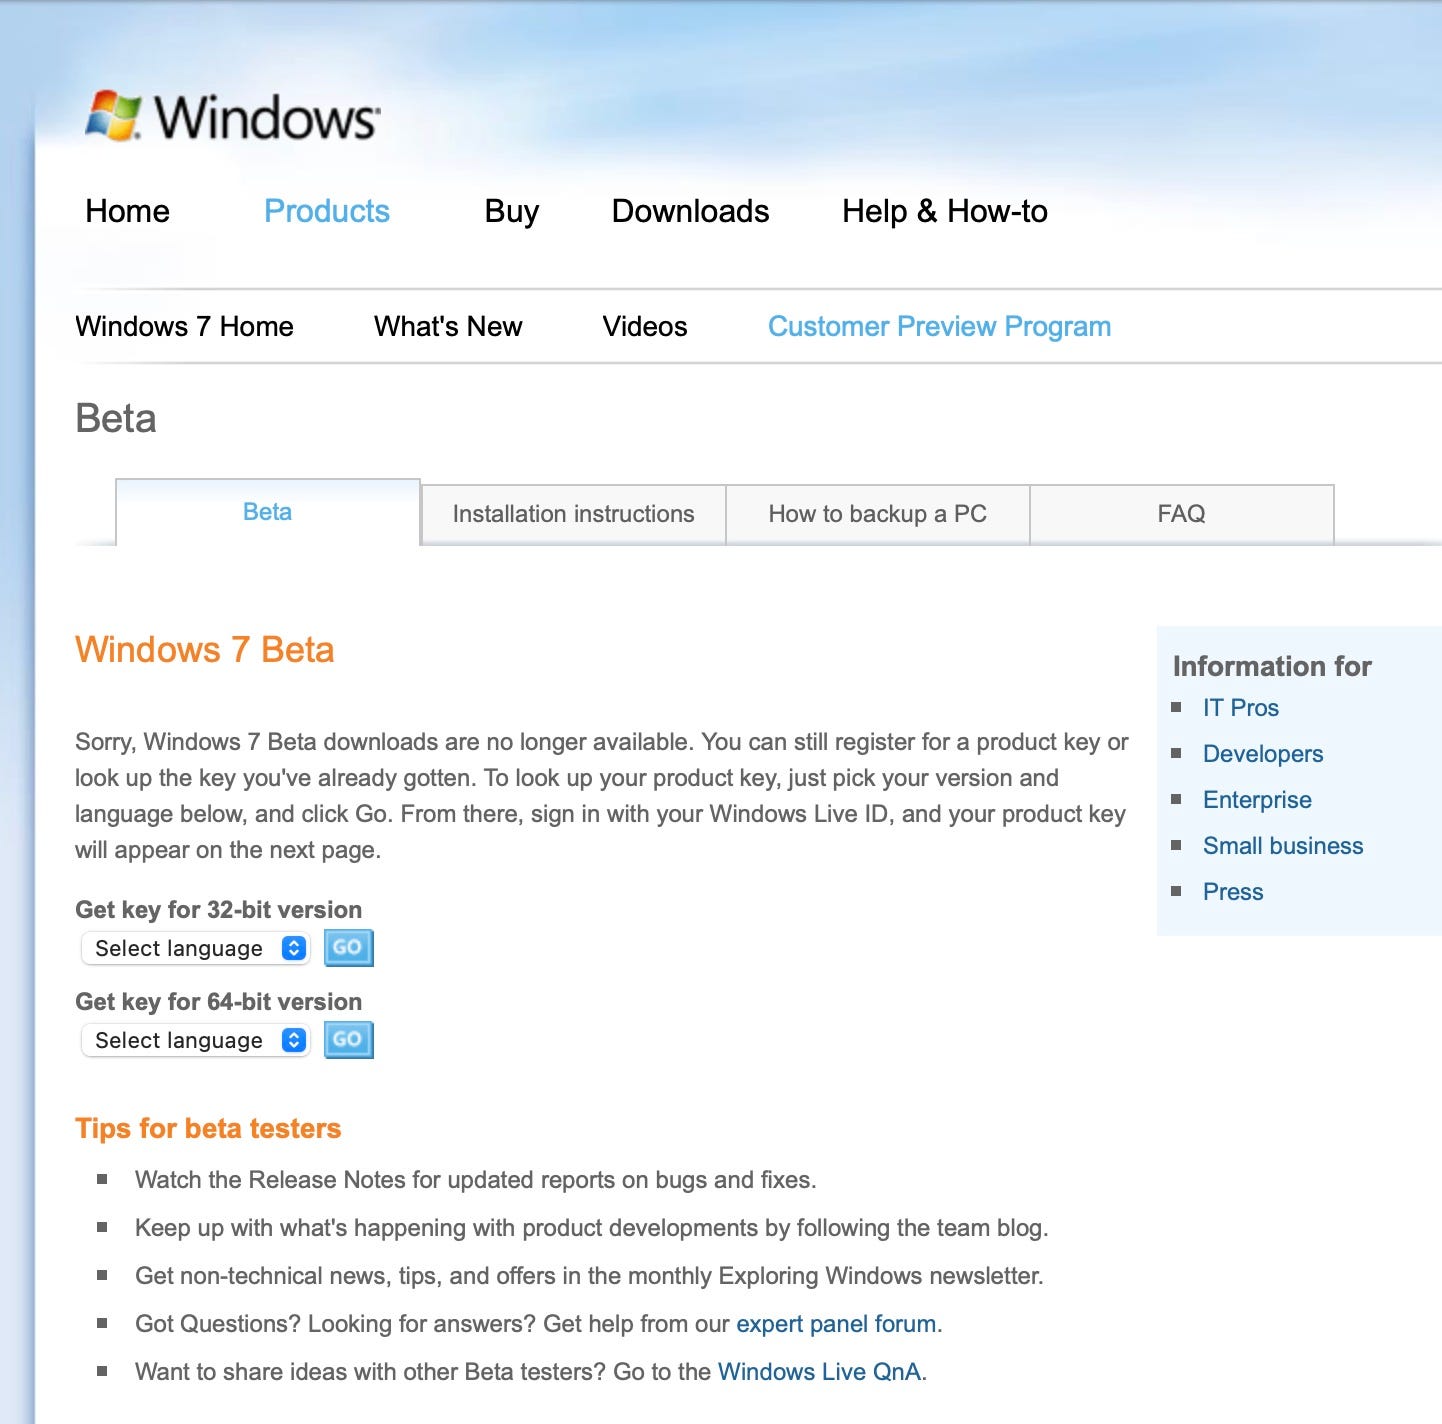 Windows 7 Beta Sorry, Windows 7 Beta downloads are no longer available. You can still register for a product key or look up the key you've already gotten. To look up your product key, just pick your version and language below, and click Go. From there, sign in with your Windows Live ID, and your product key will appear on the next page.